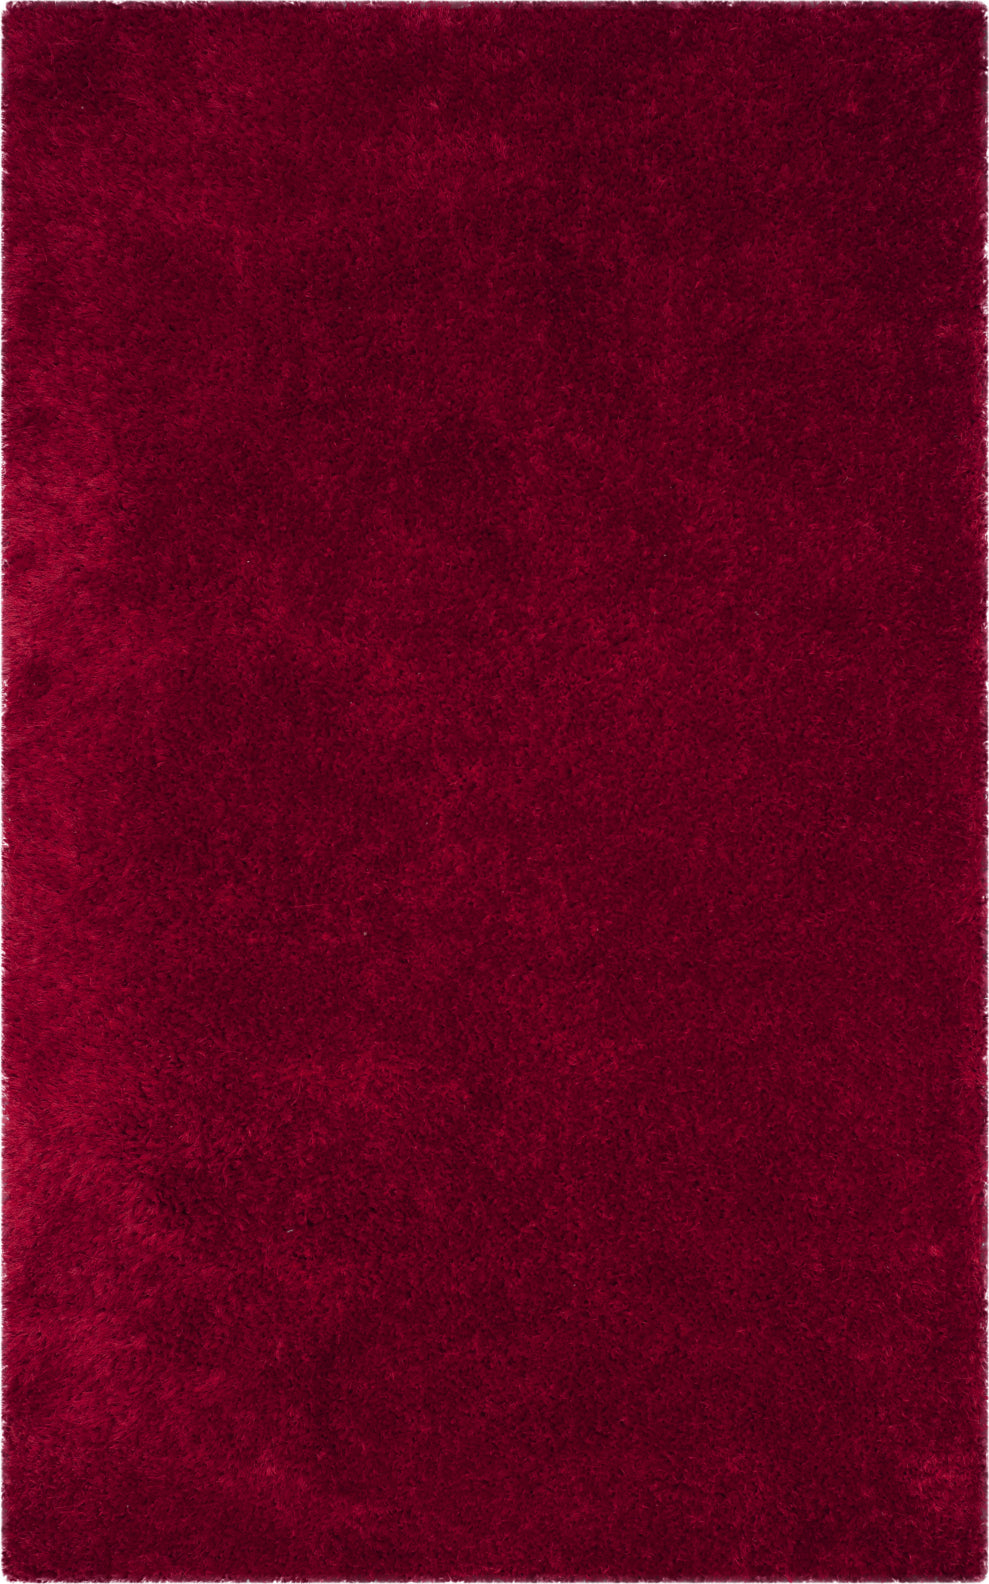 Safavieh Luxe Shag 160 Red Area Rug main image